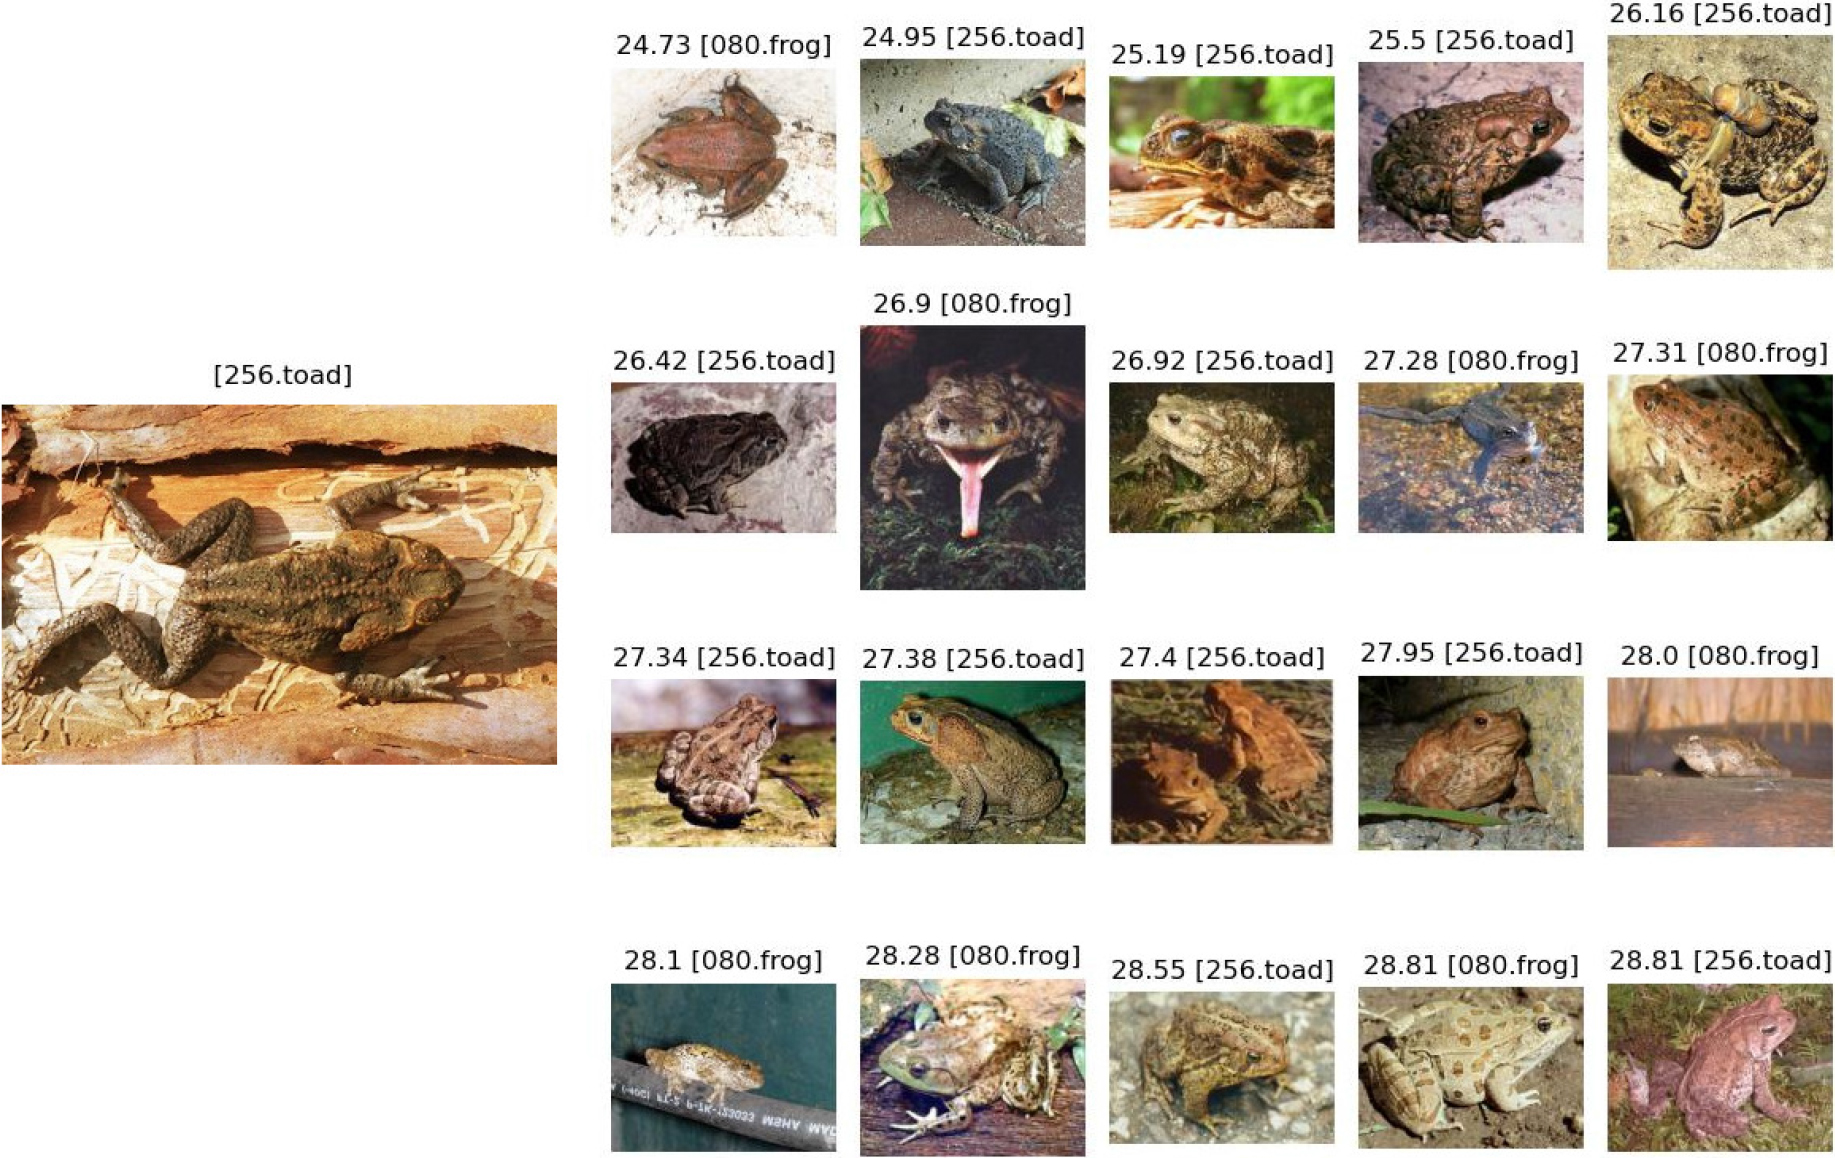 On the left, the query image (256_0081.jpg) from the Caltech-256 toad class. On the right, the 20 images whose PCA-ResFeats were closest to the PCA-ResFeats obtained for the query. The distances and the classes of the examples are given above the images.